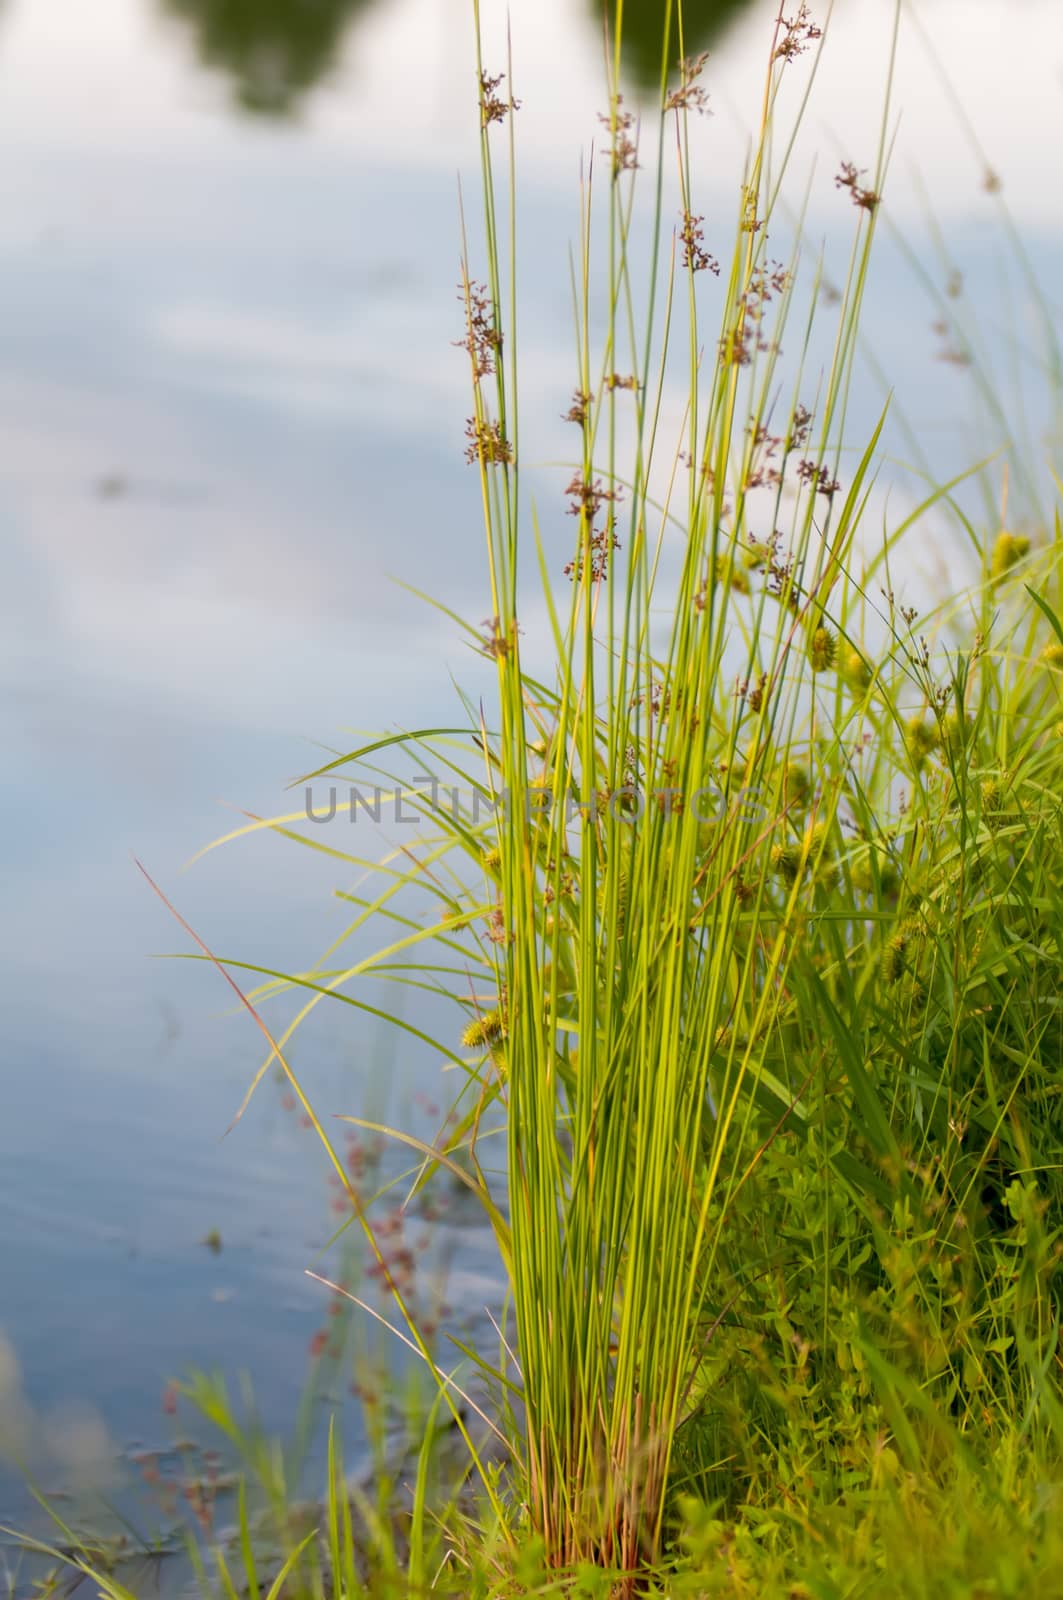 Flowering reed plants near a lake. by digidreamgrafix